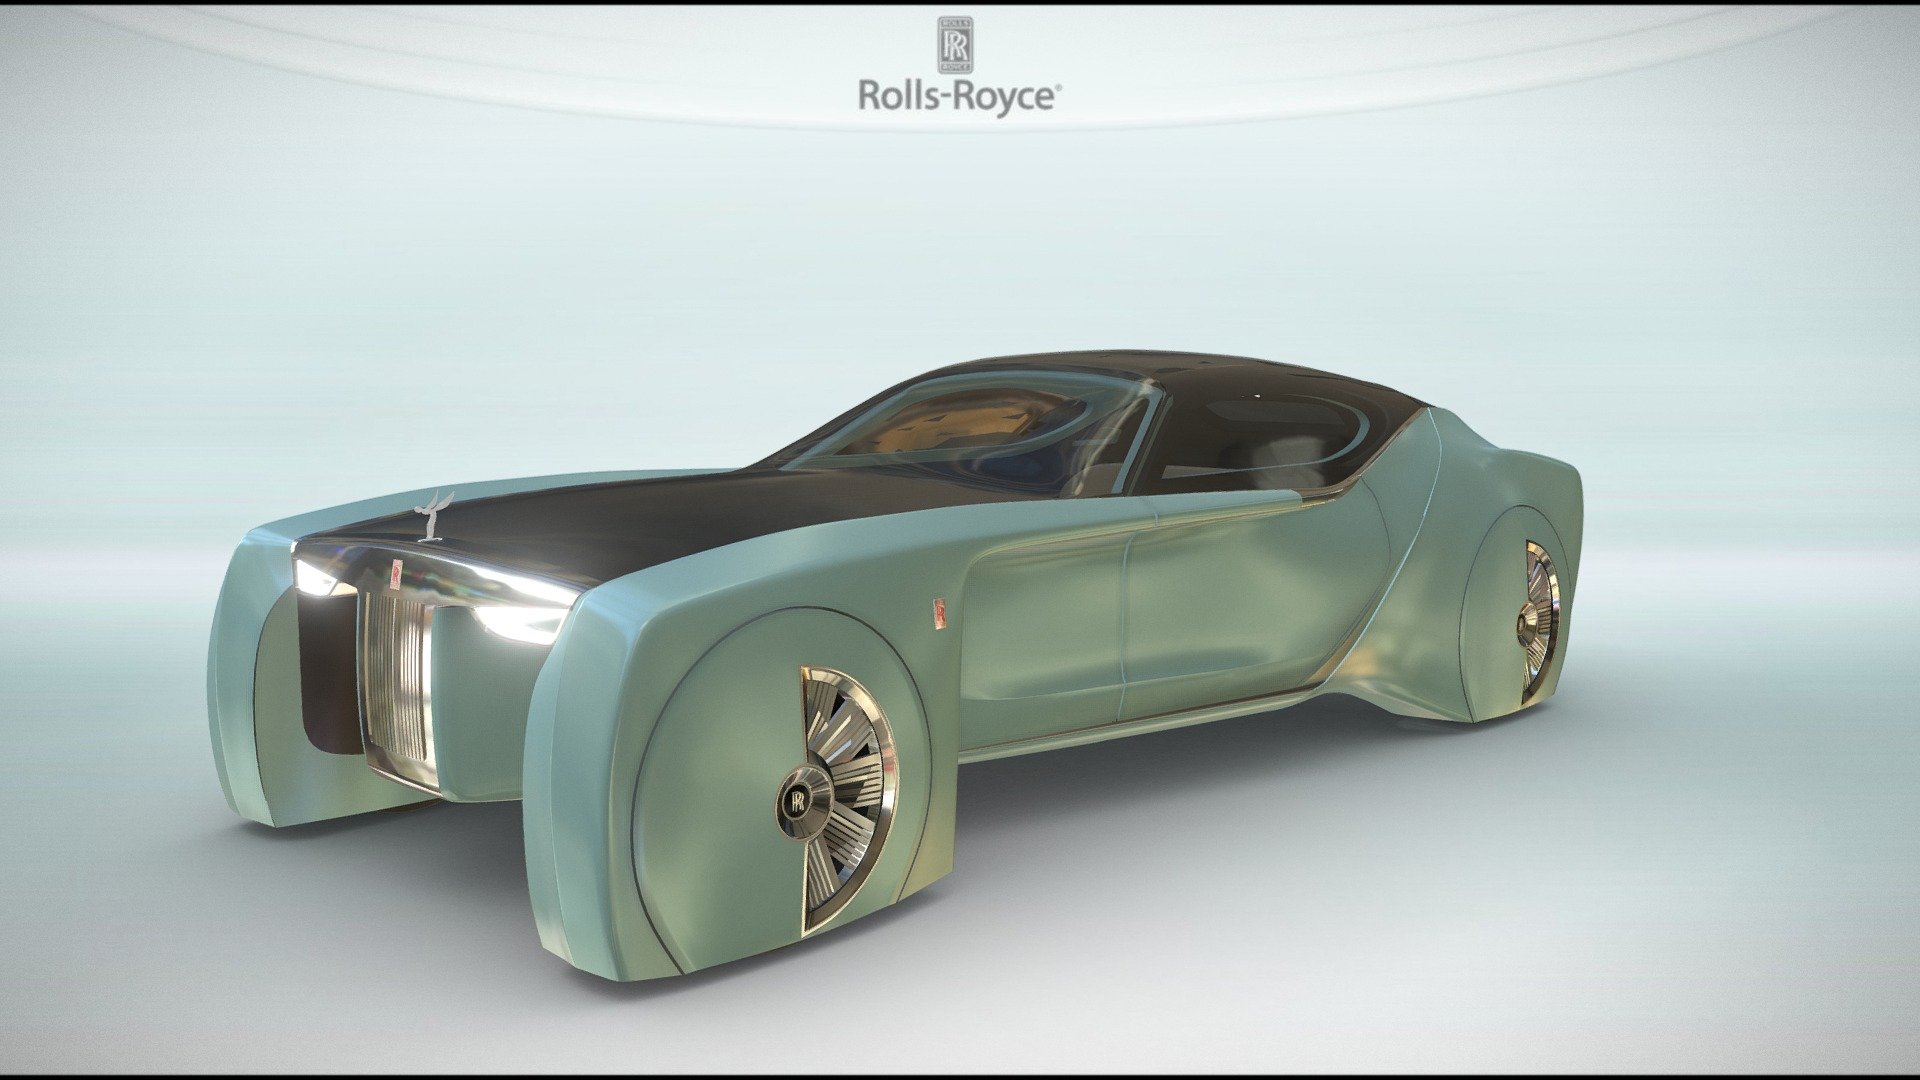 RollsRoyce Vision Next 100 concept  the future of the luxury car  evo